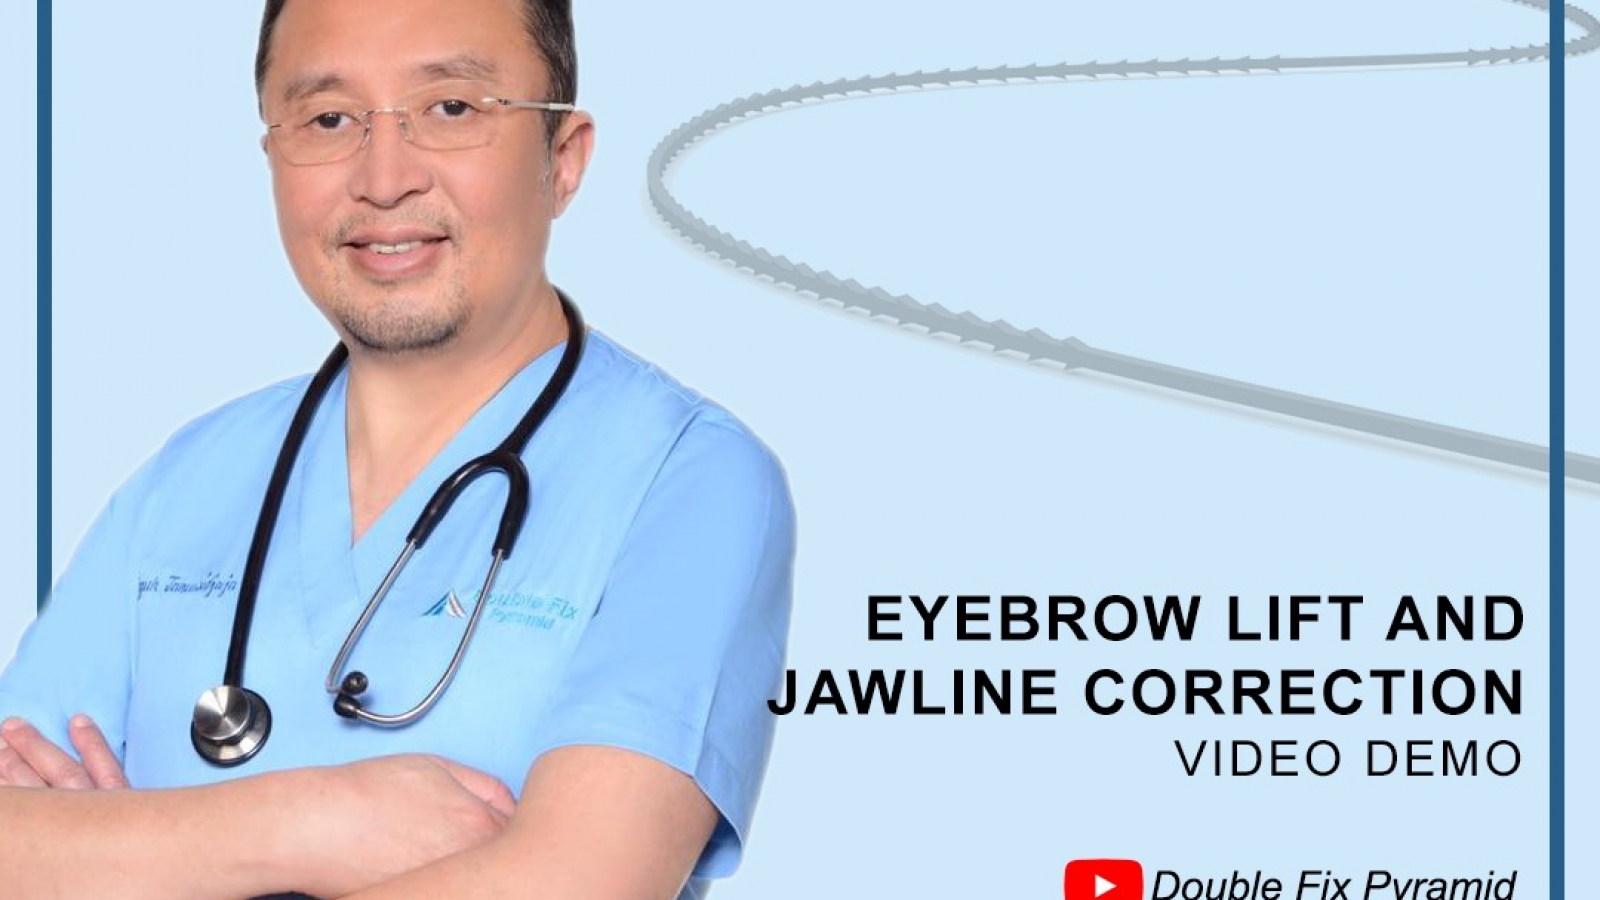 eyebrow lift and jawline correction live demo by double fix pyramid thread